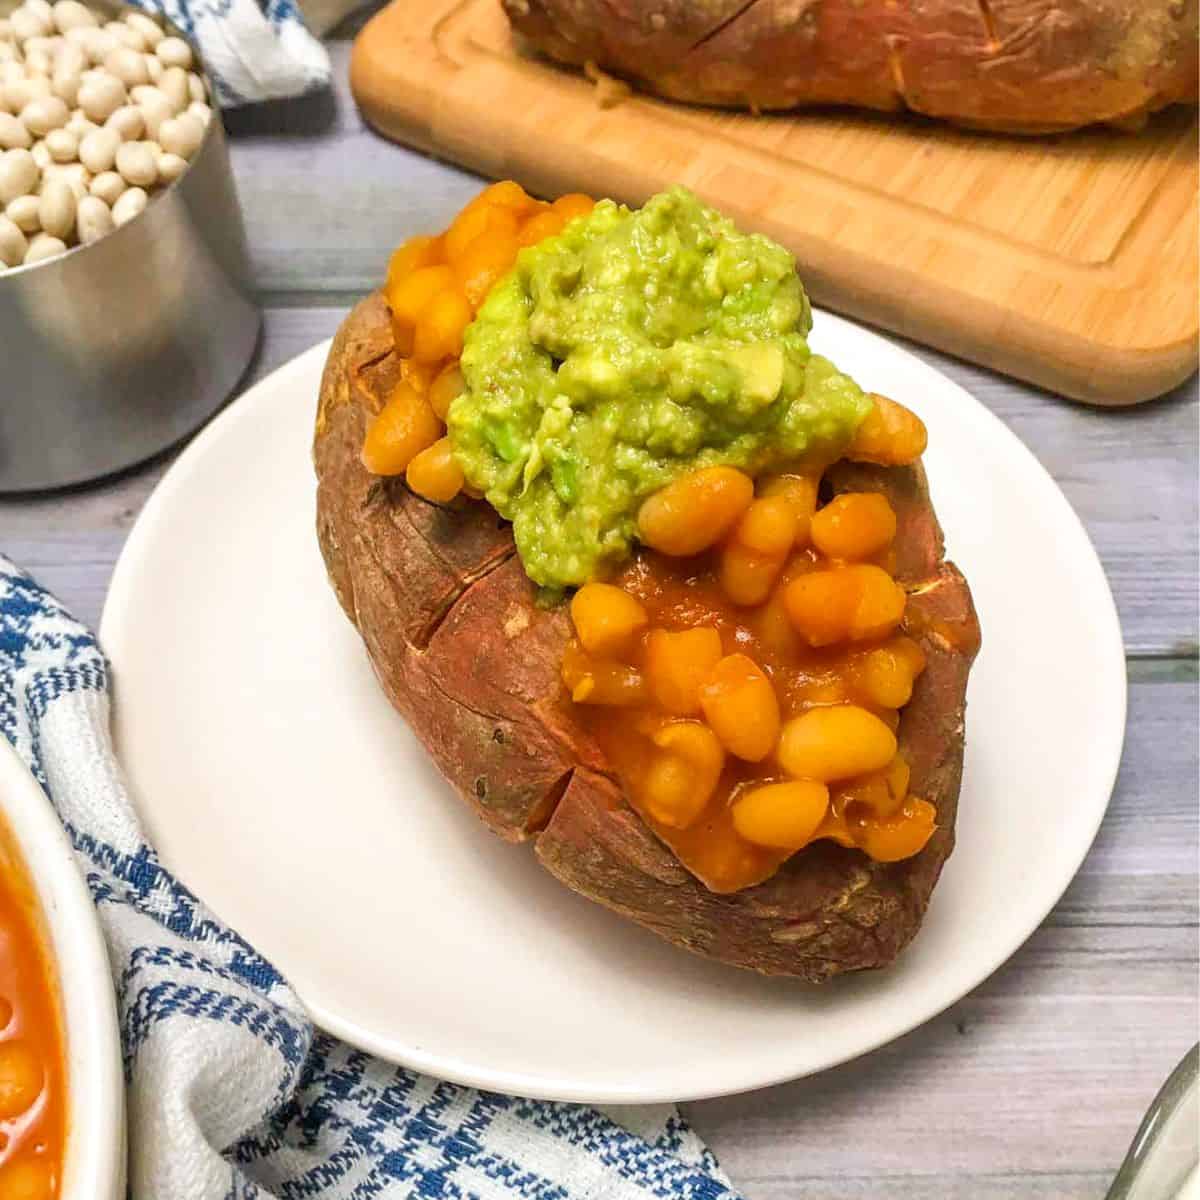 Loaded sweet potato with baked beans and guacamole.